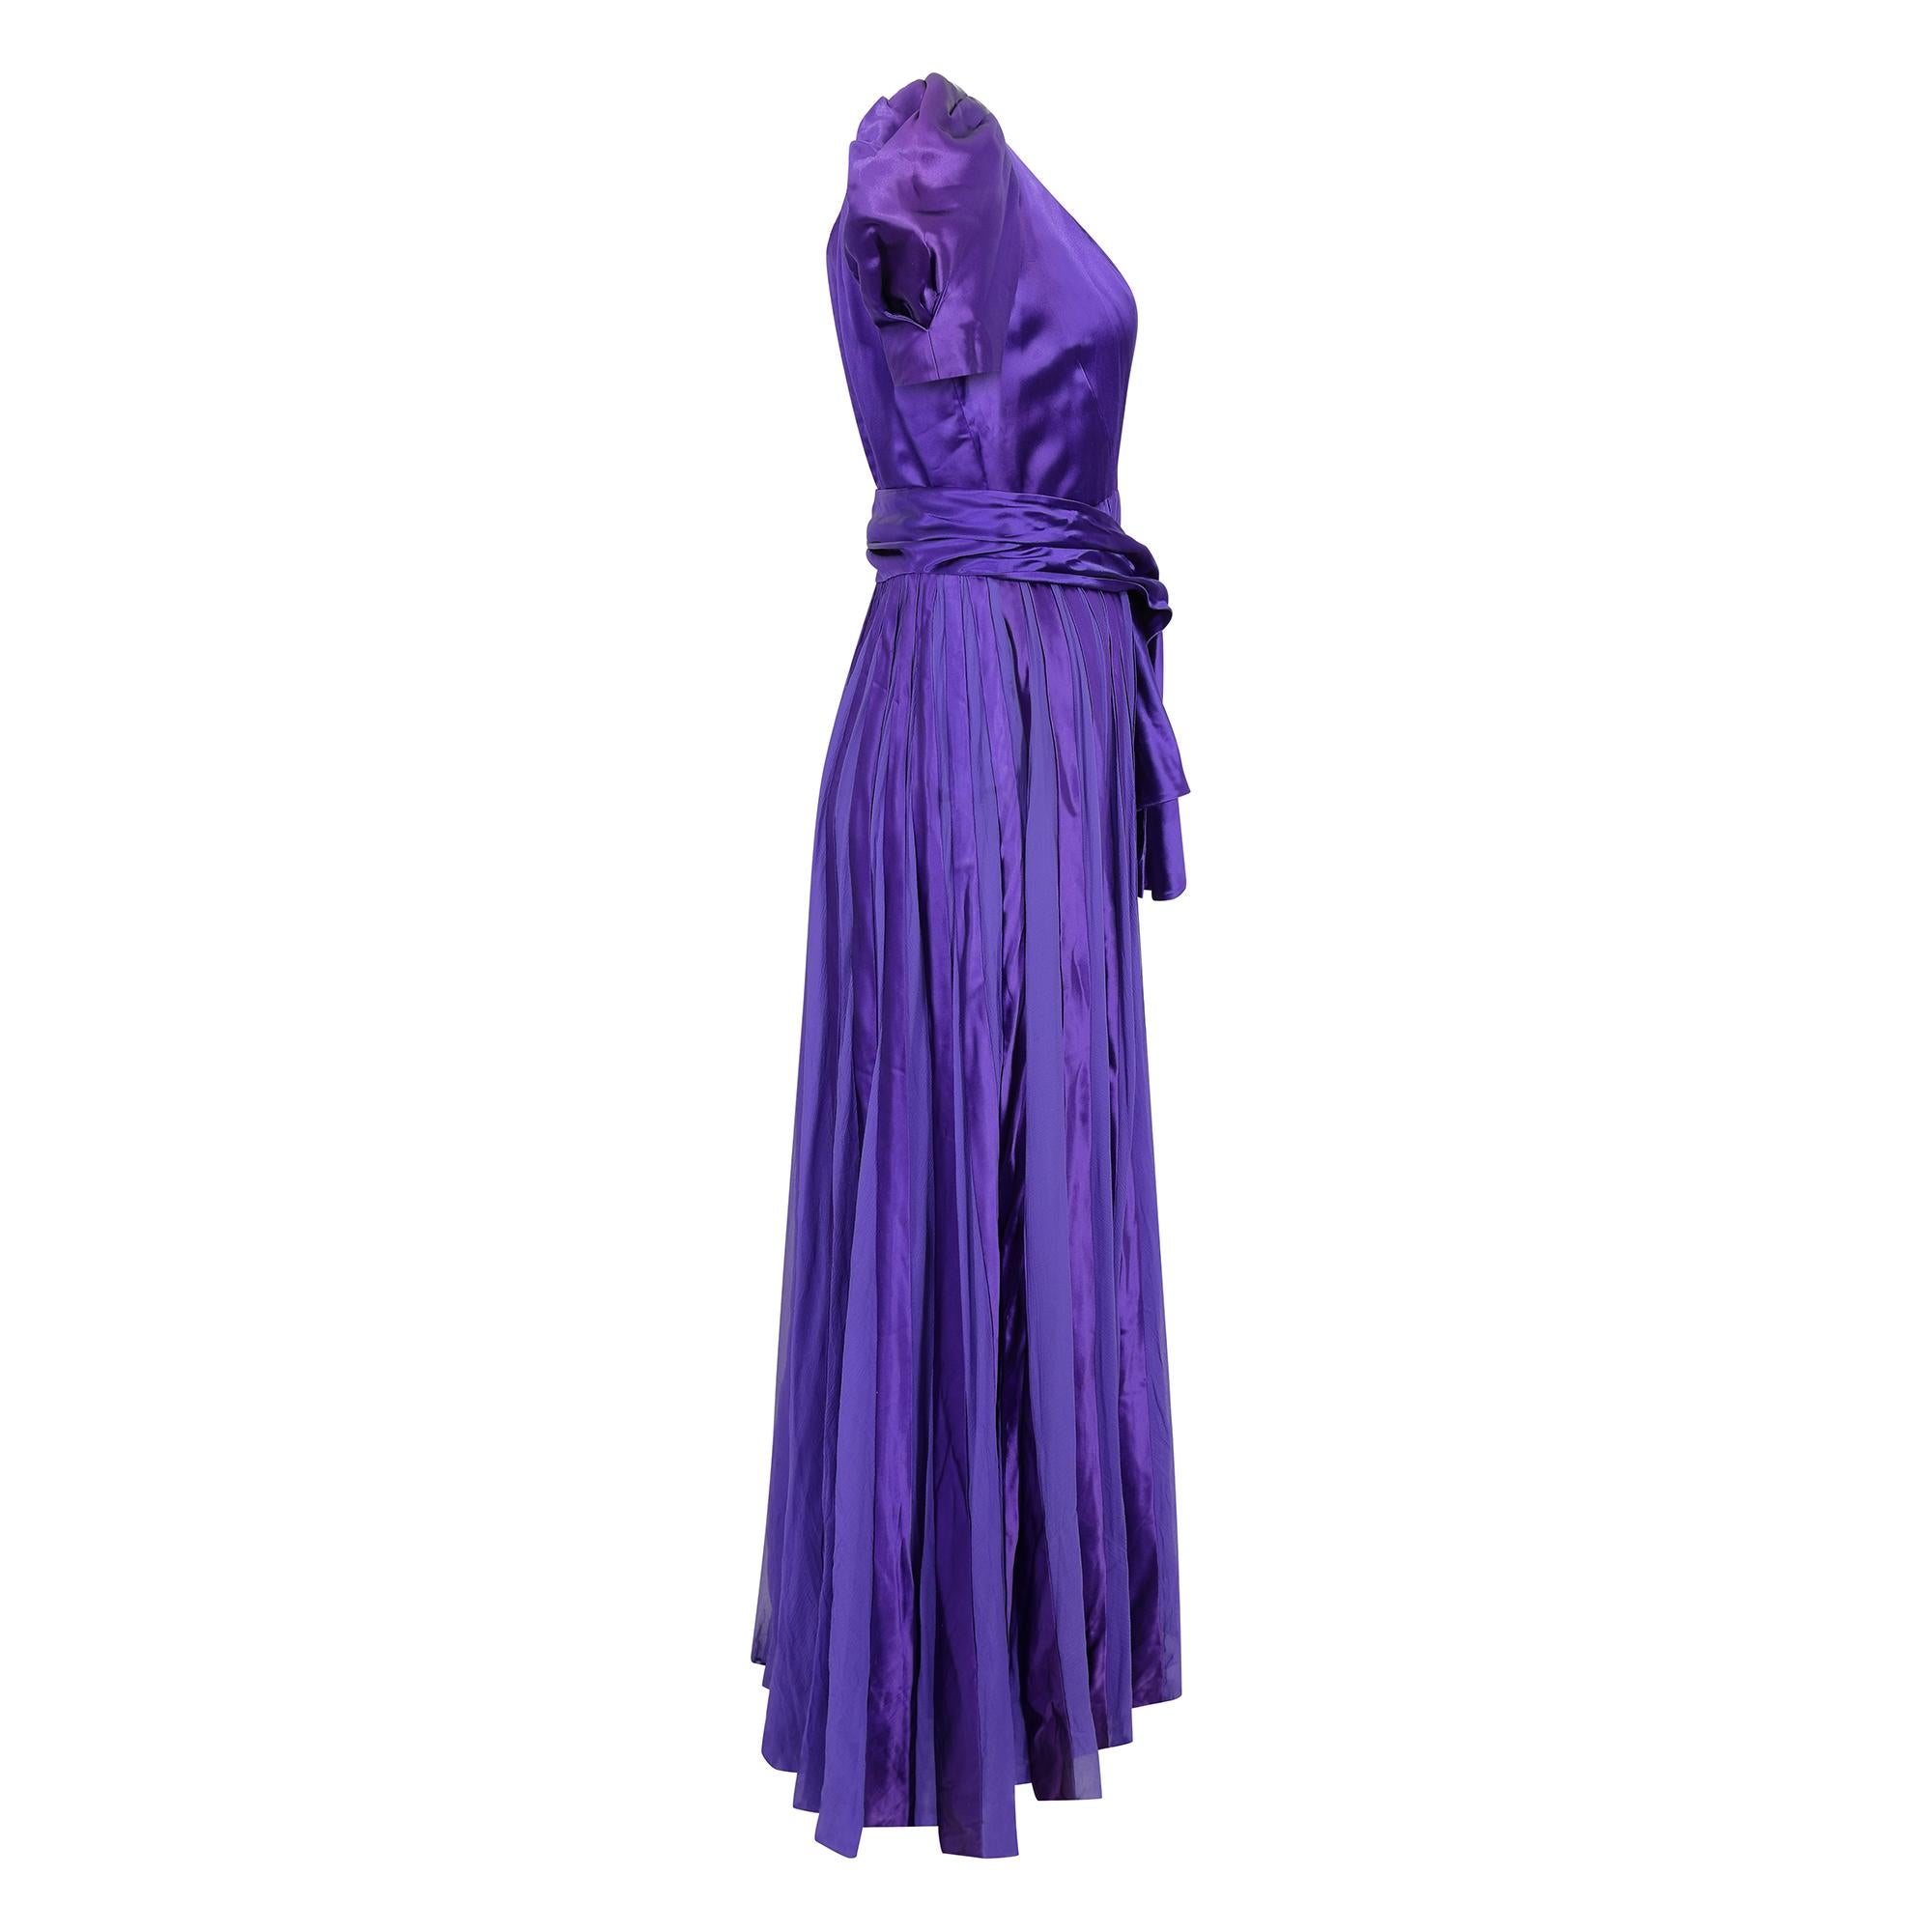 Original late 1930s or early 1940s purple satin and chiffon gown with matching waist sash. This beautiful unlabelled haute couture dress is of superb quality and construction and is in absolutely incredible vintage condition. The skirt finish is